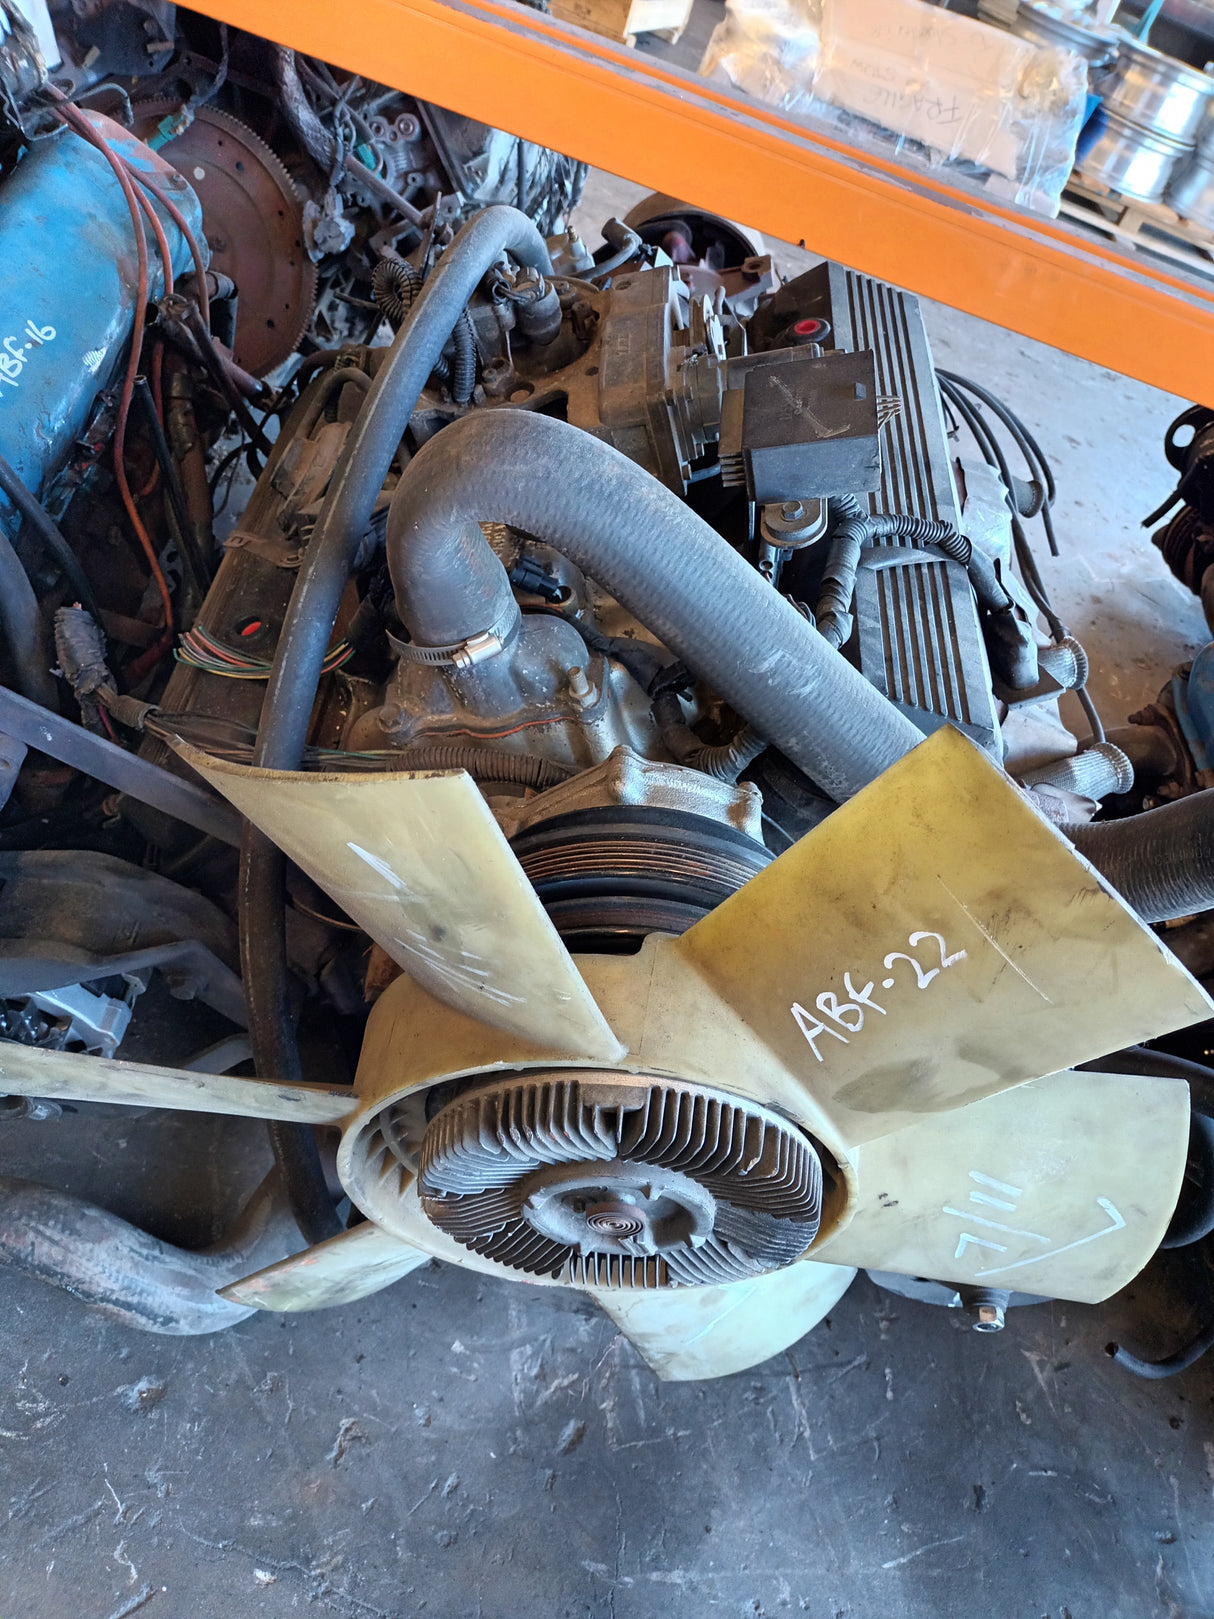 ENGINE CHEV 366 BB USED CONDITION GOOD FOR REBUILDING